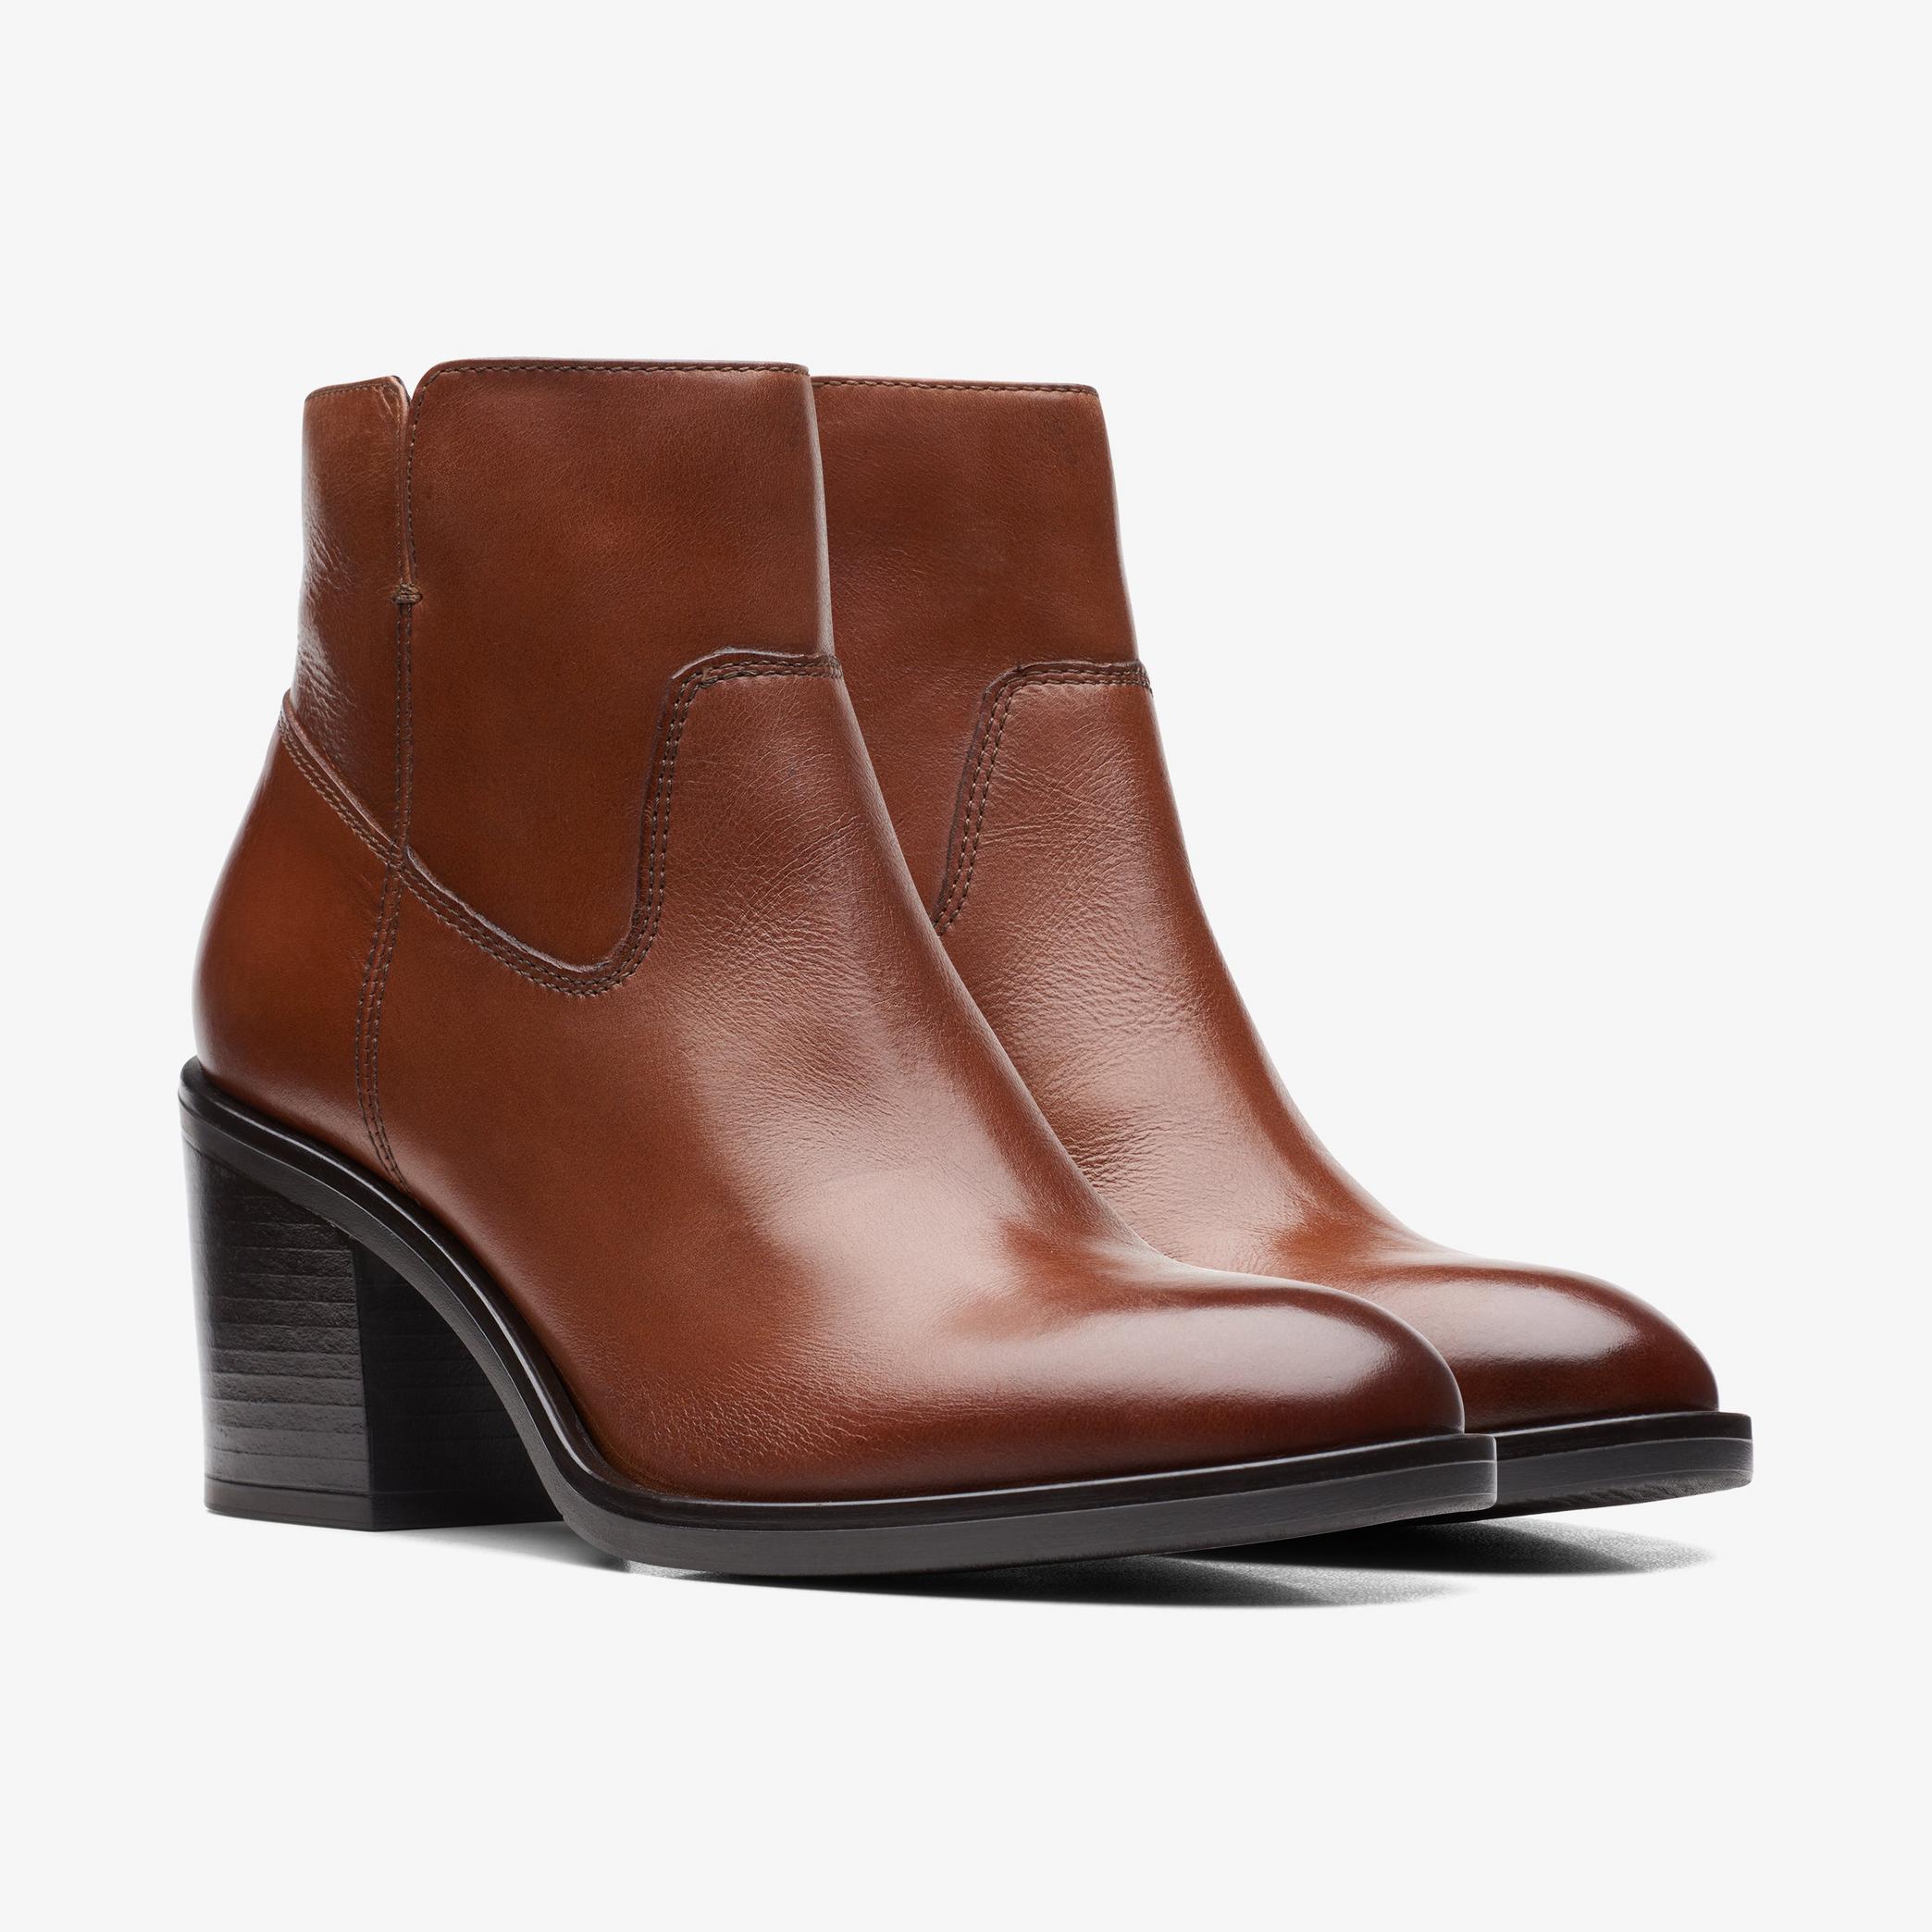 Valvestino Lo Dark Tan Leather Ankle Boots, view 5 of 7